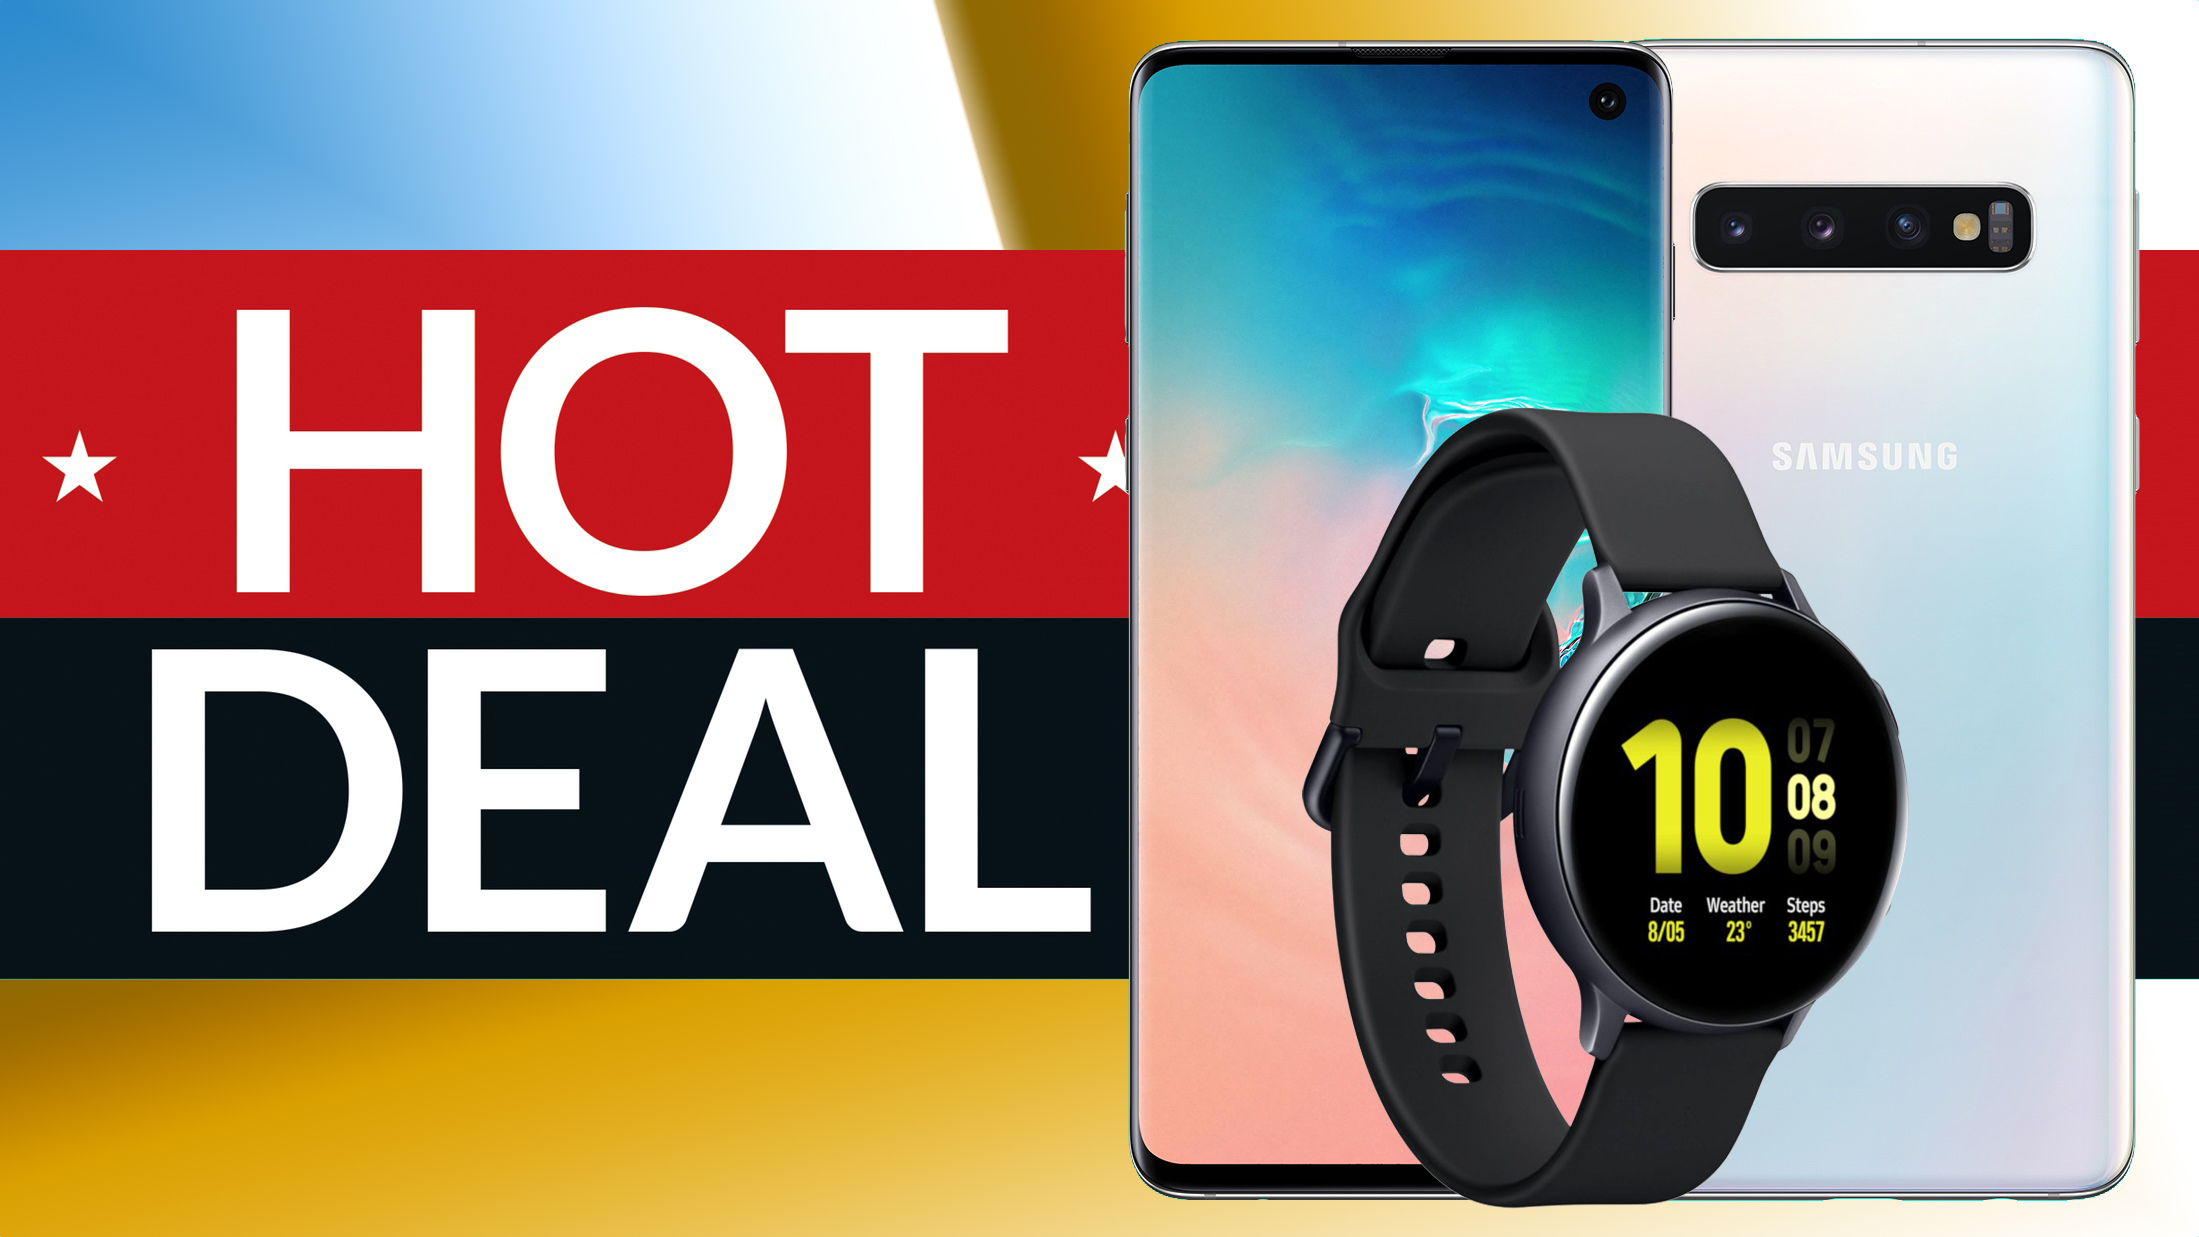 samsung phone with watch deal